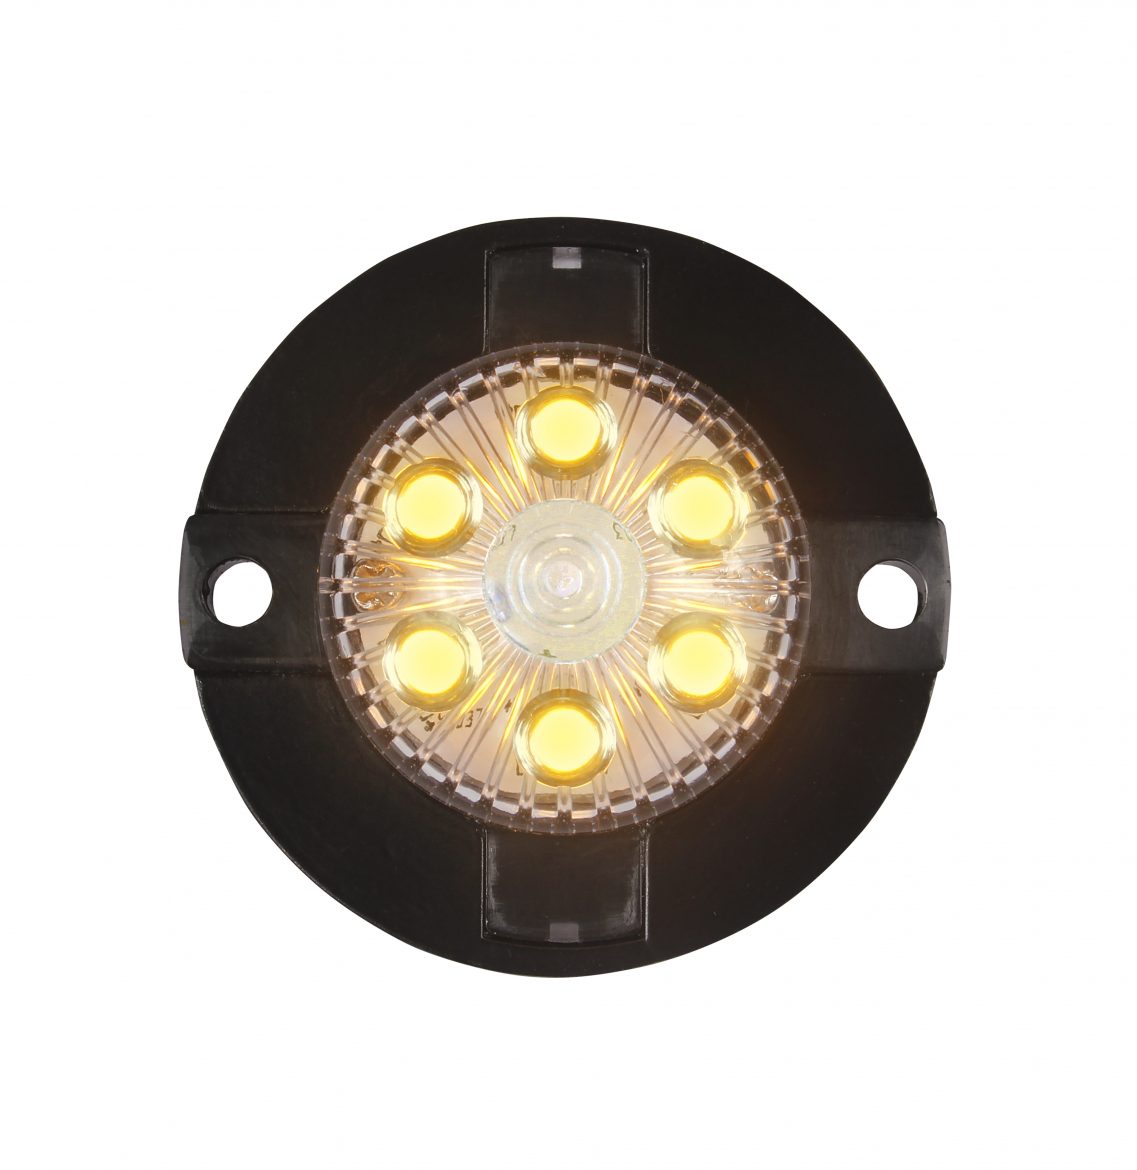 AMBER LED Mini-X Extreme Strobe Lights with 17 Flash Patterns.  Available at Baremotion.com